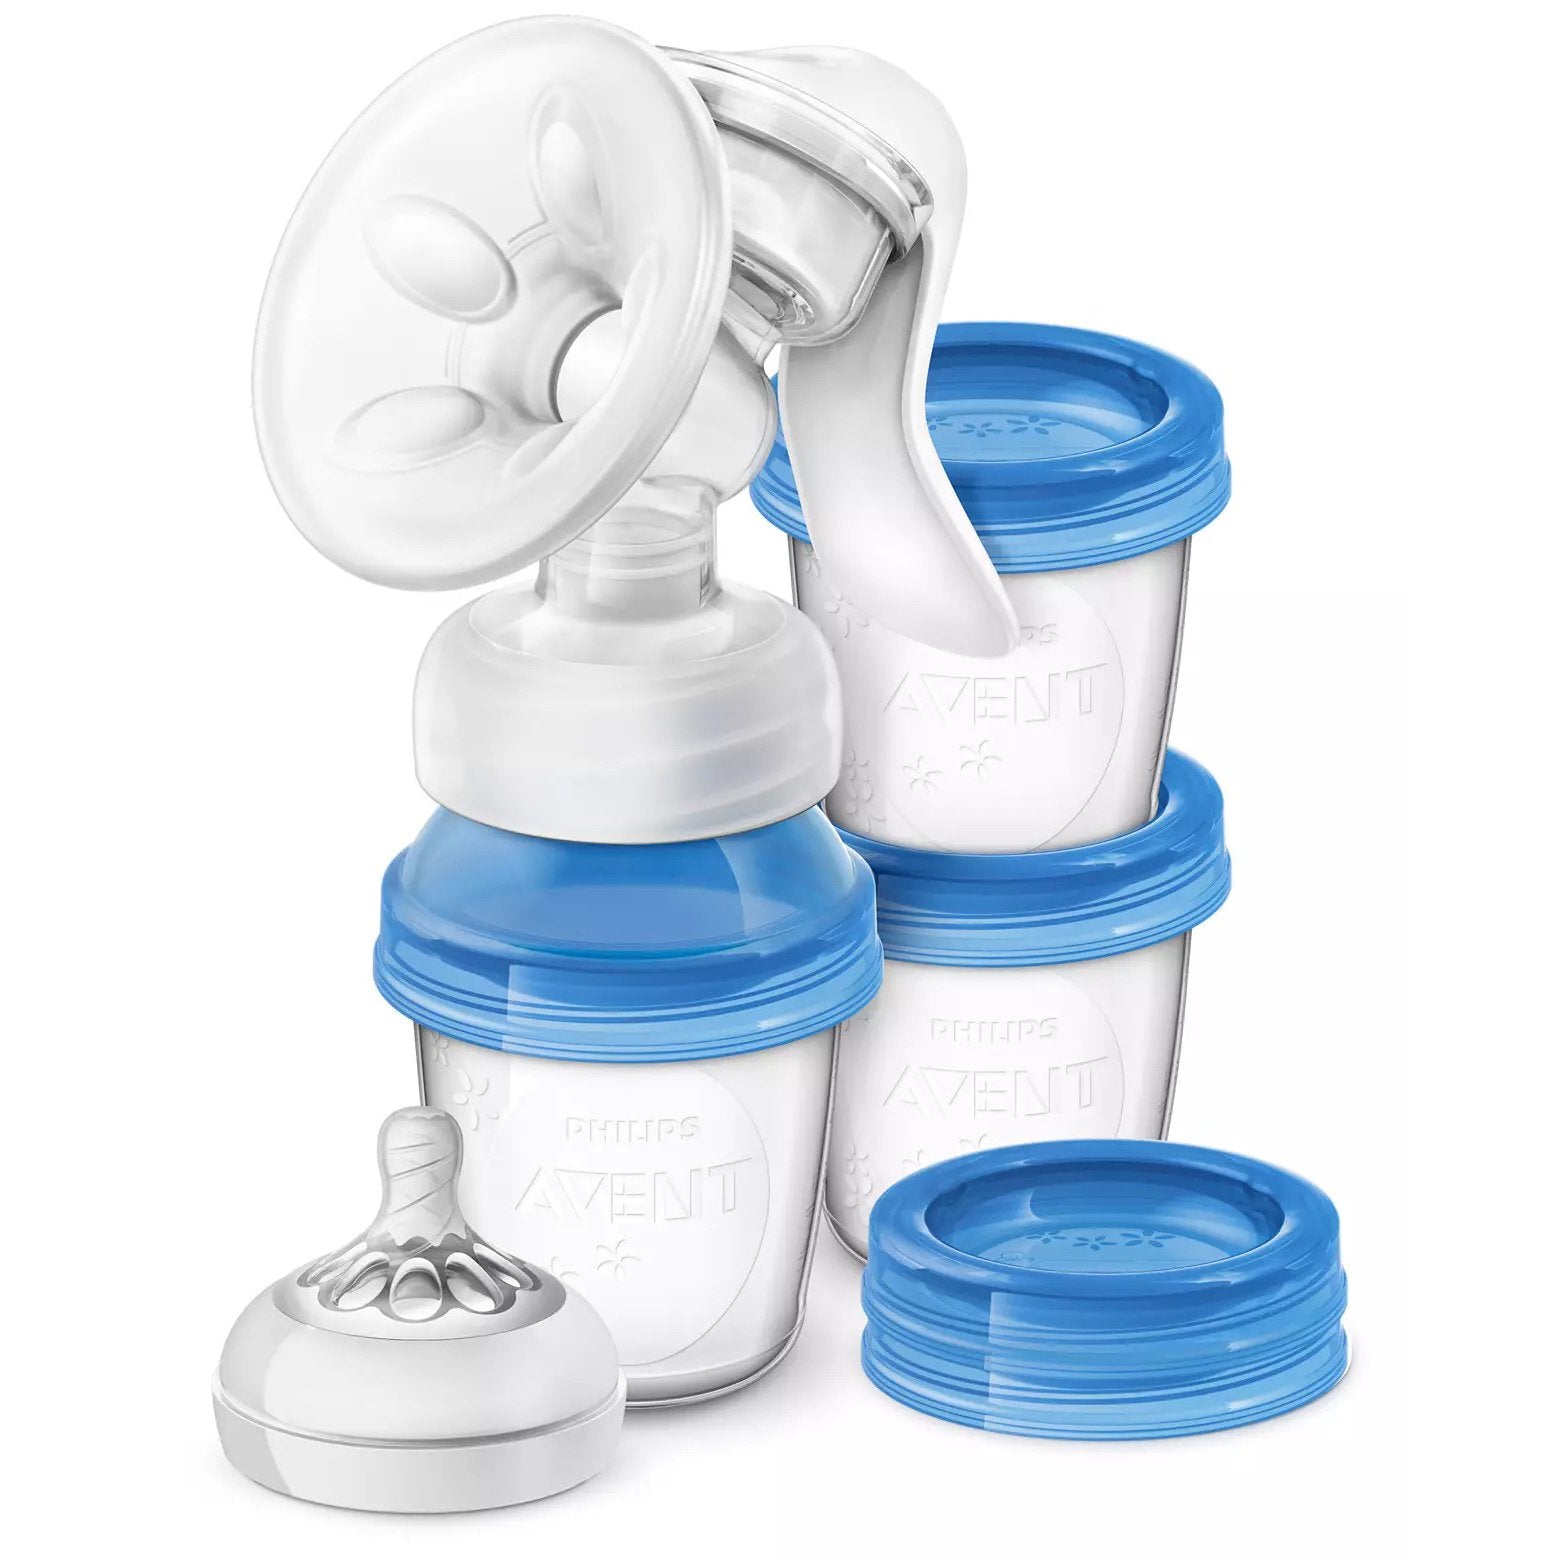 philips-avent-the-manual-breast-pump-has-3-breast-milk-storage-cups- (1)